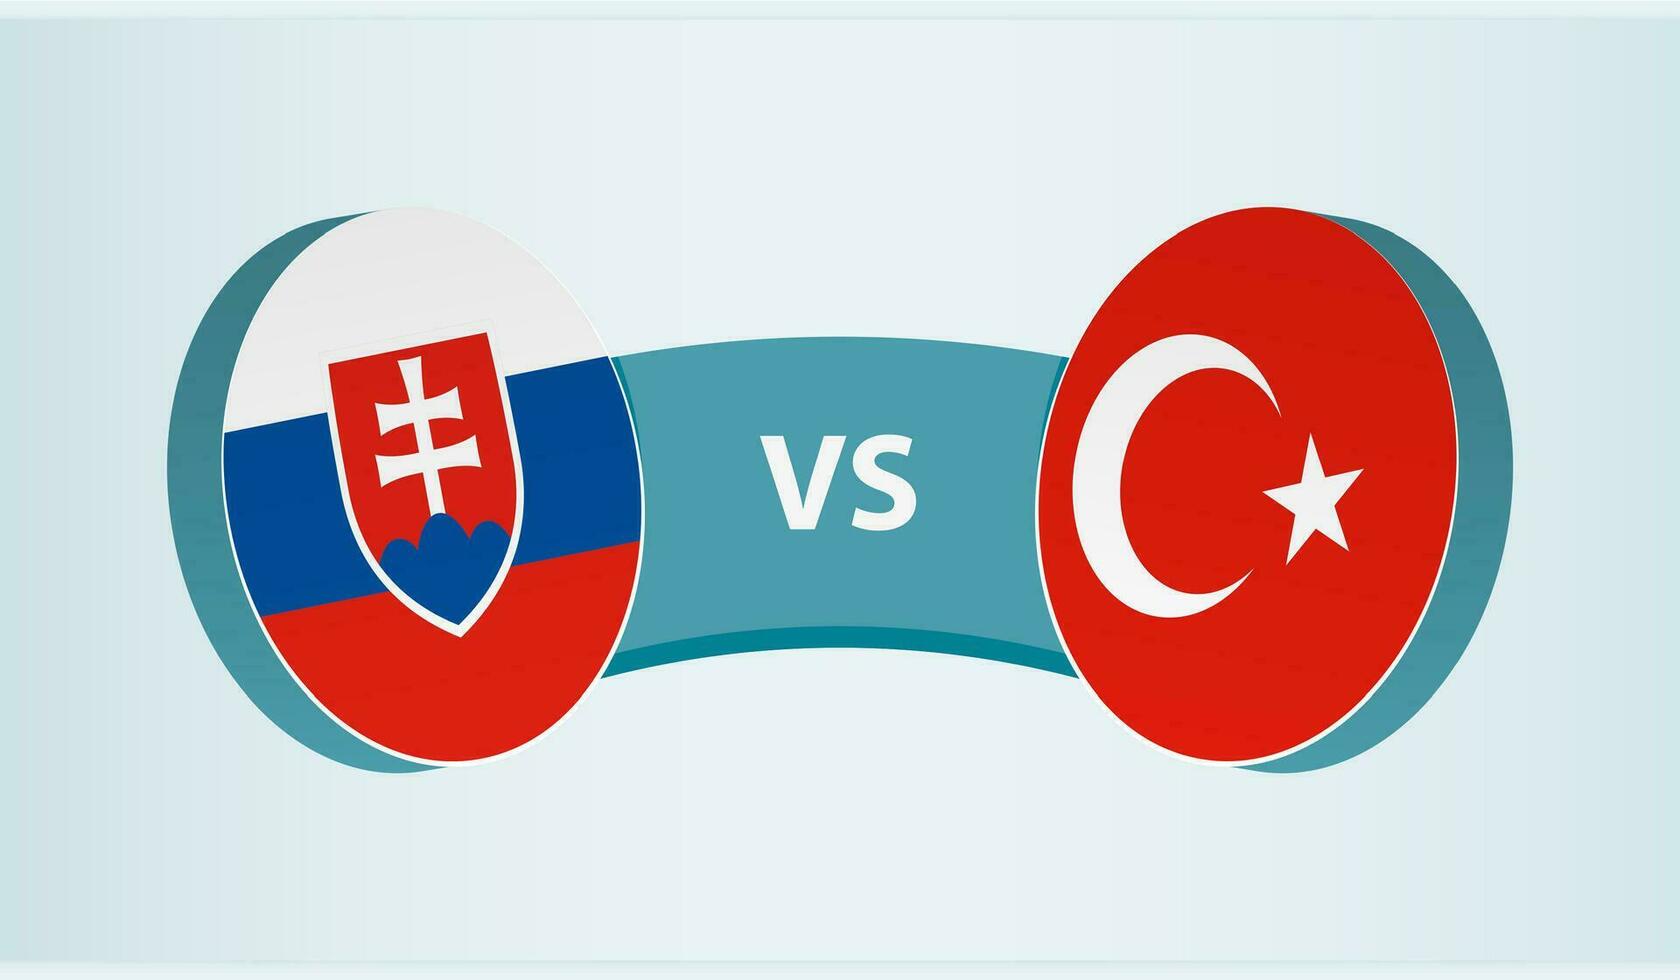 Slovakia versus Turkey, team sports competition concept. vector